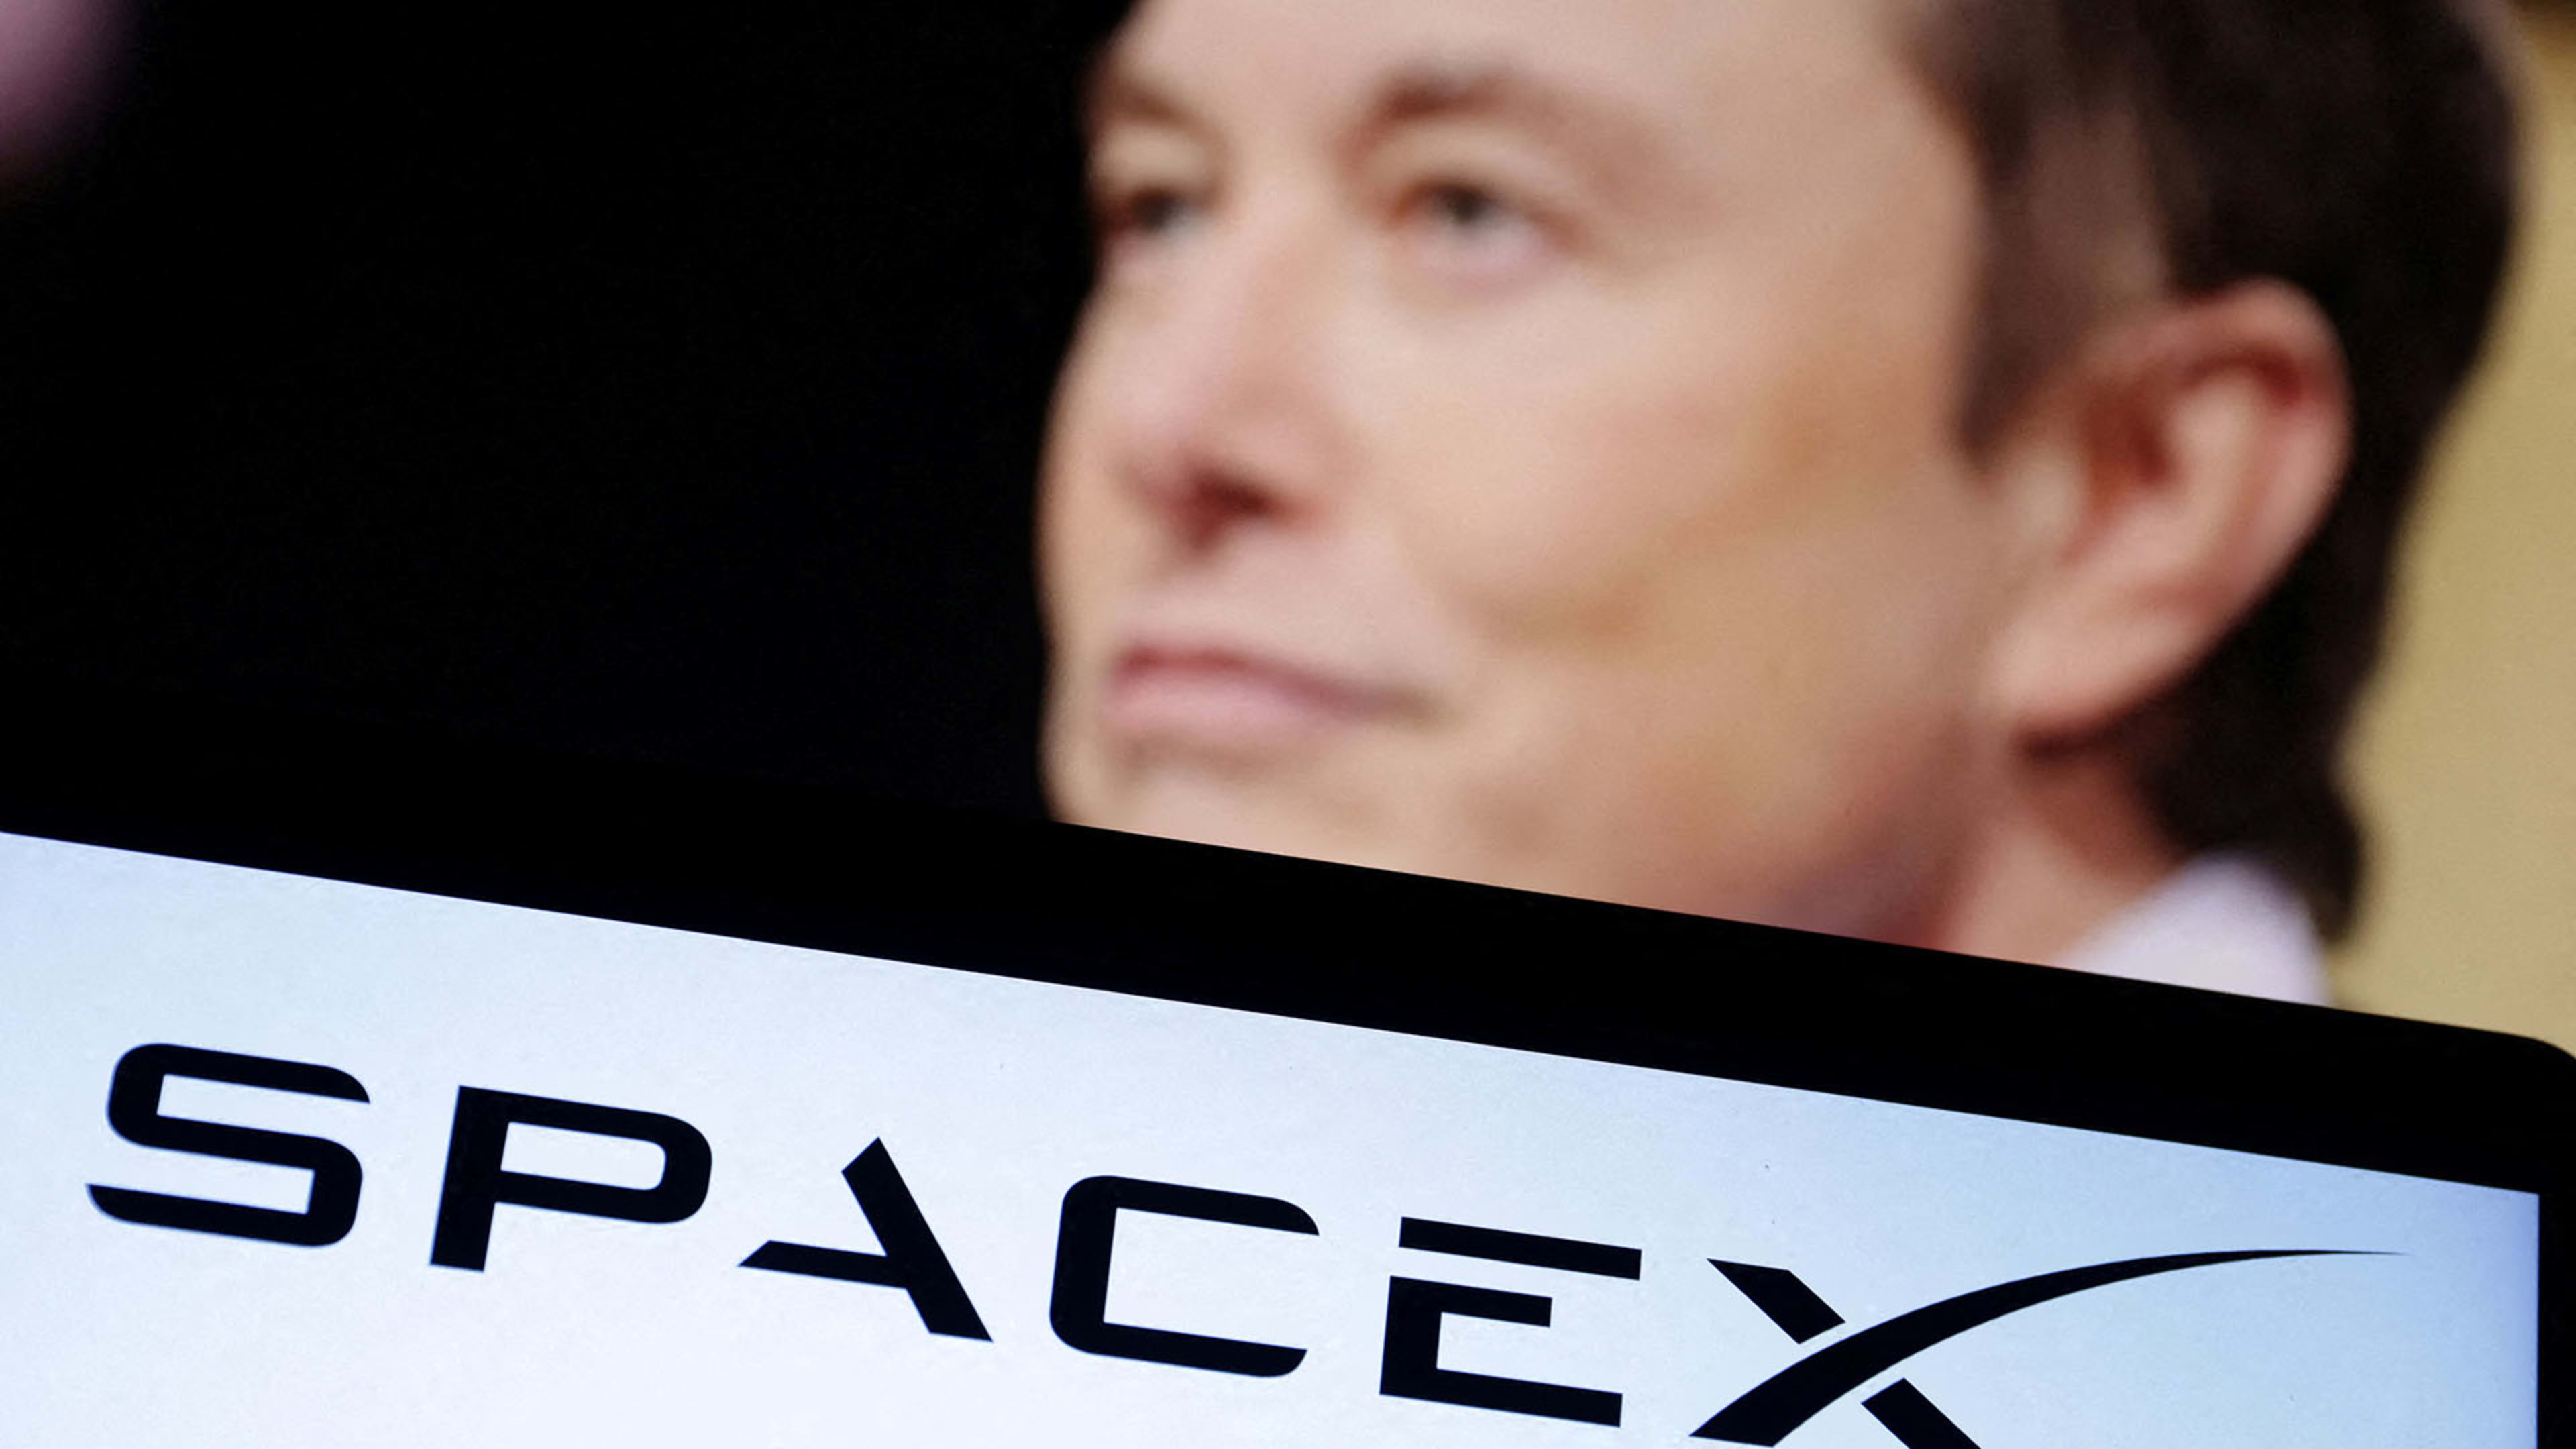 Former SpaceX engineers get their day in court claiming sex discrimination and retaliation